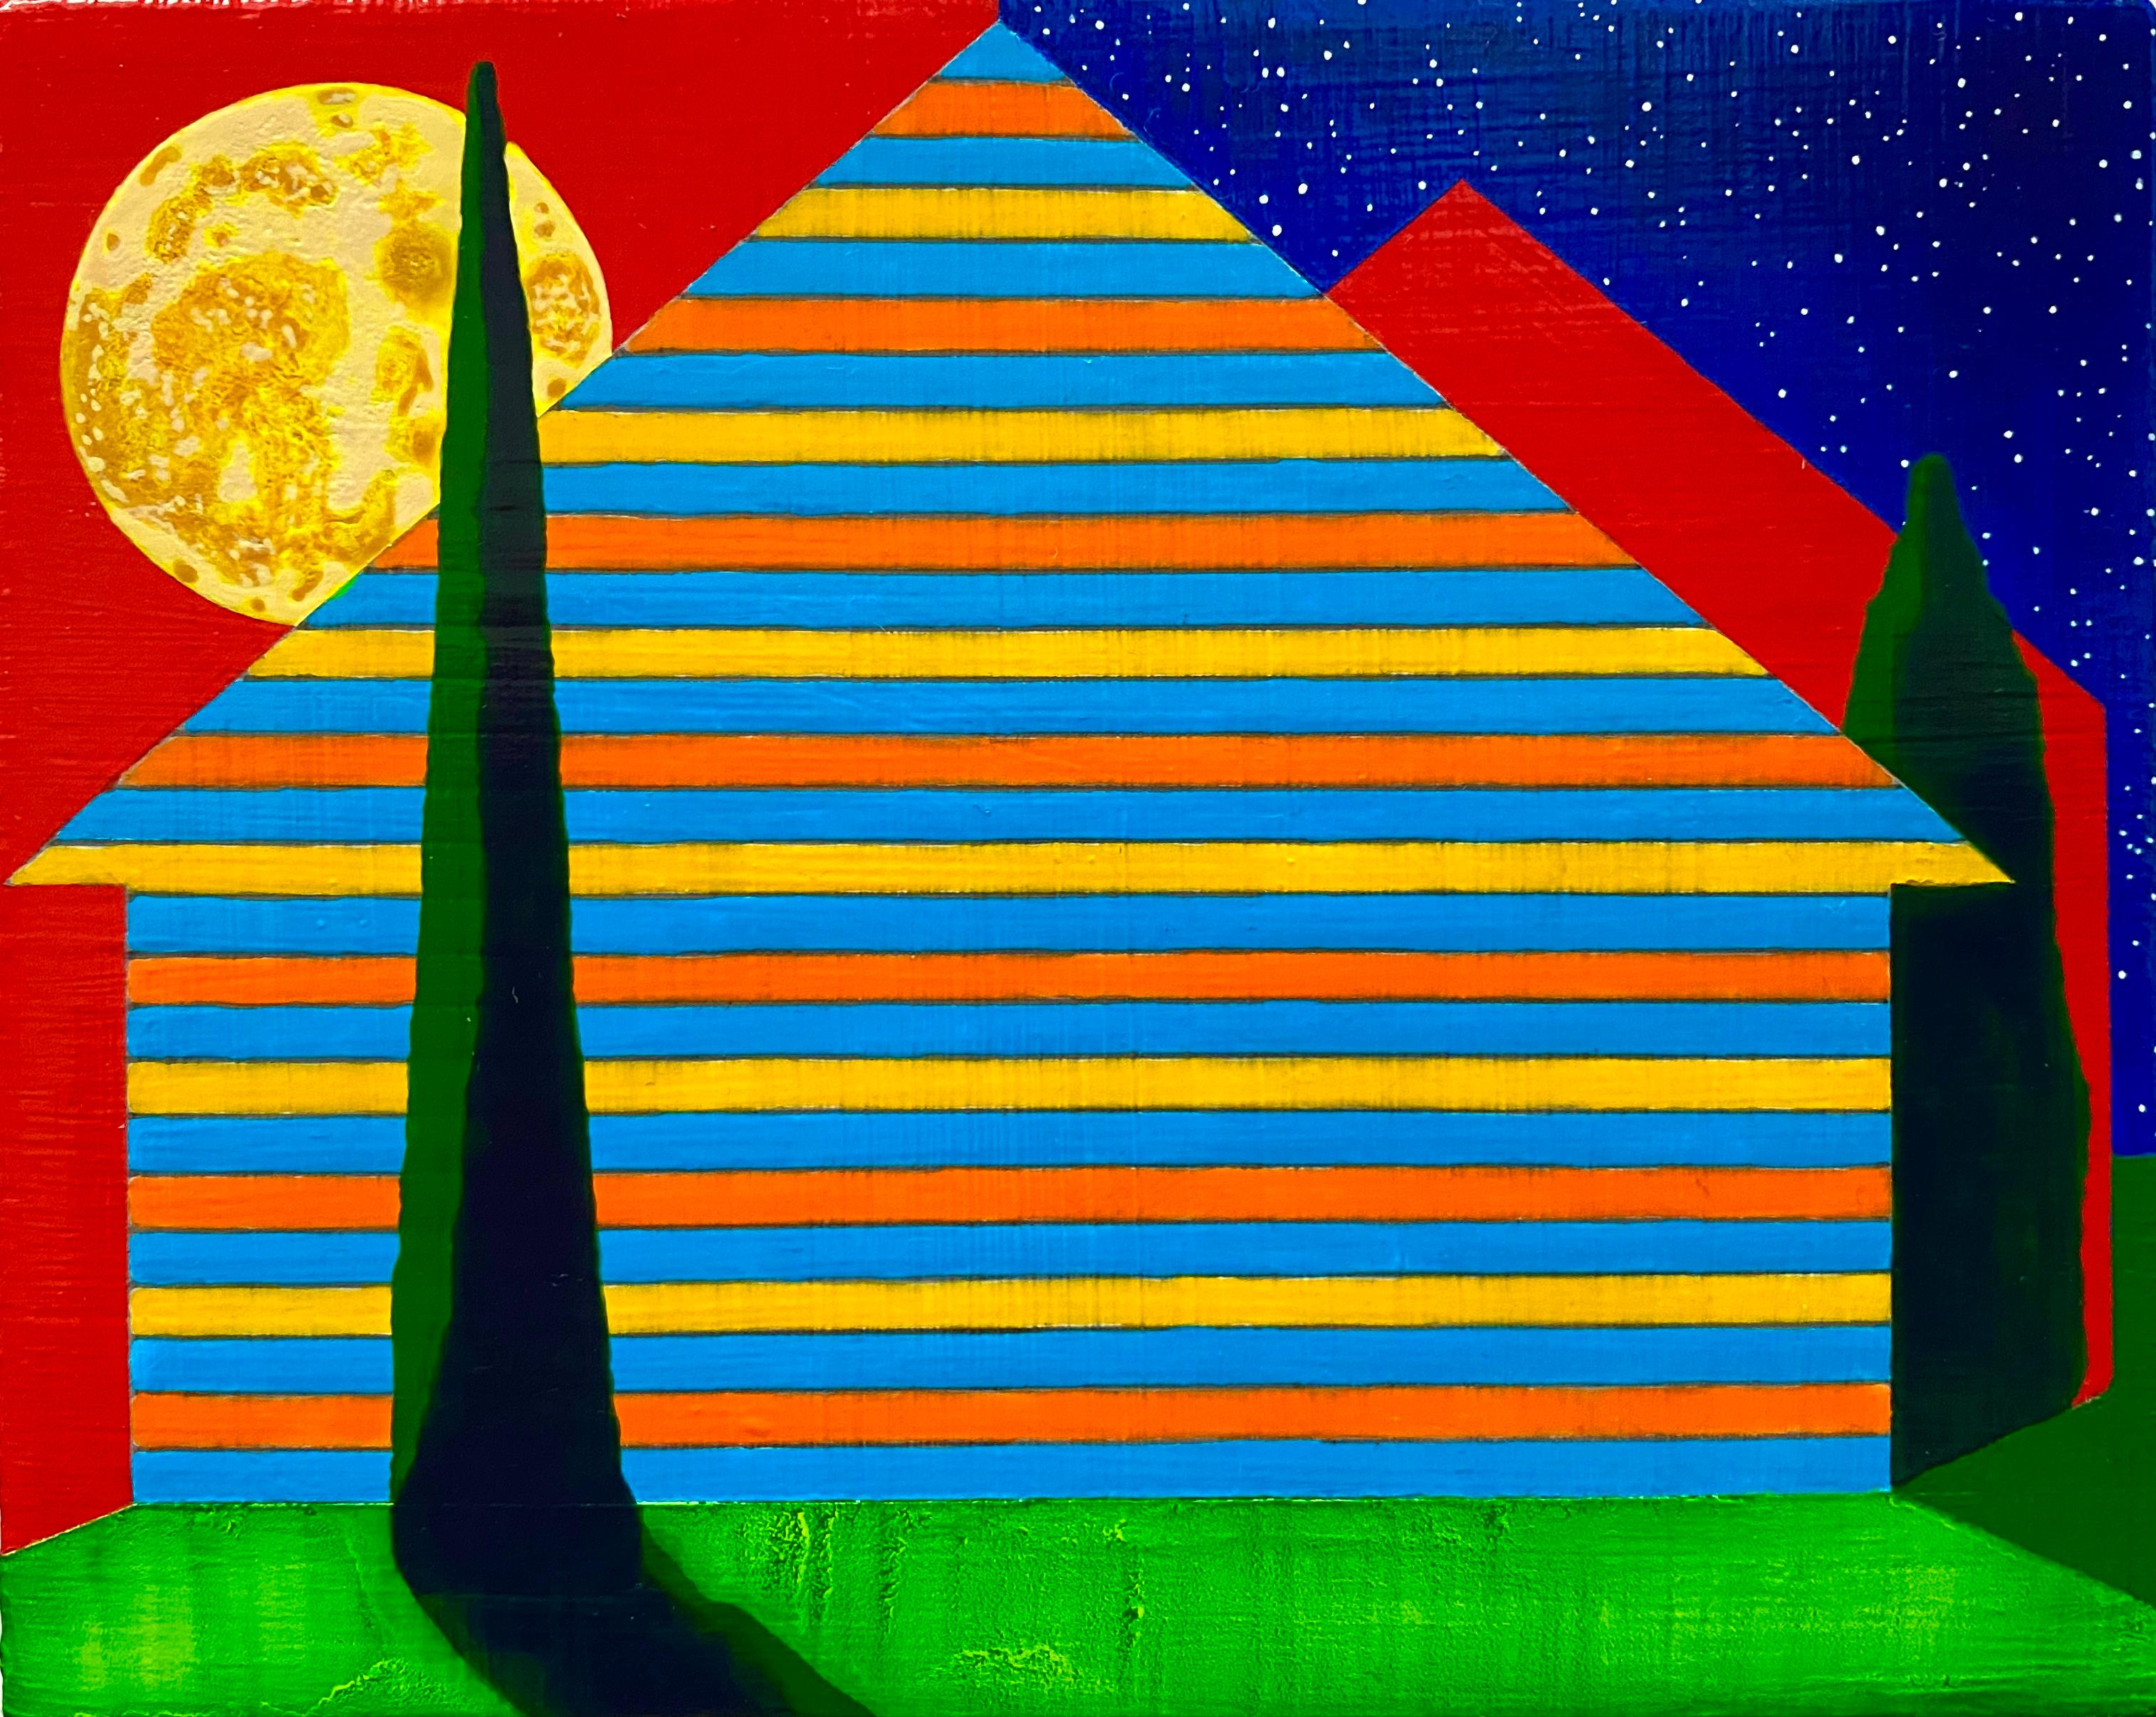 Interstice, small striped house against blue and red skies, painting on panel